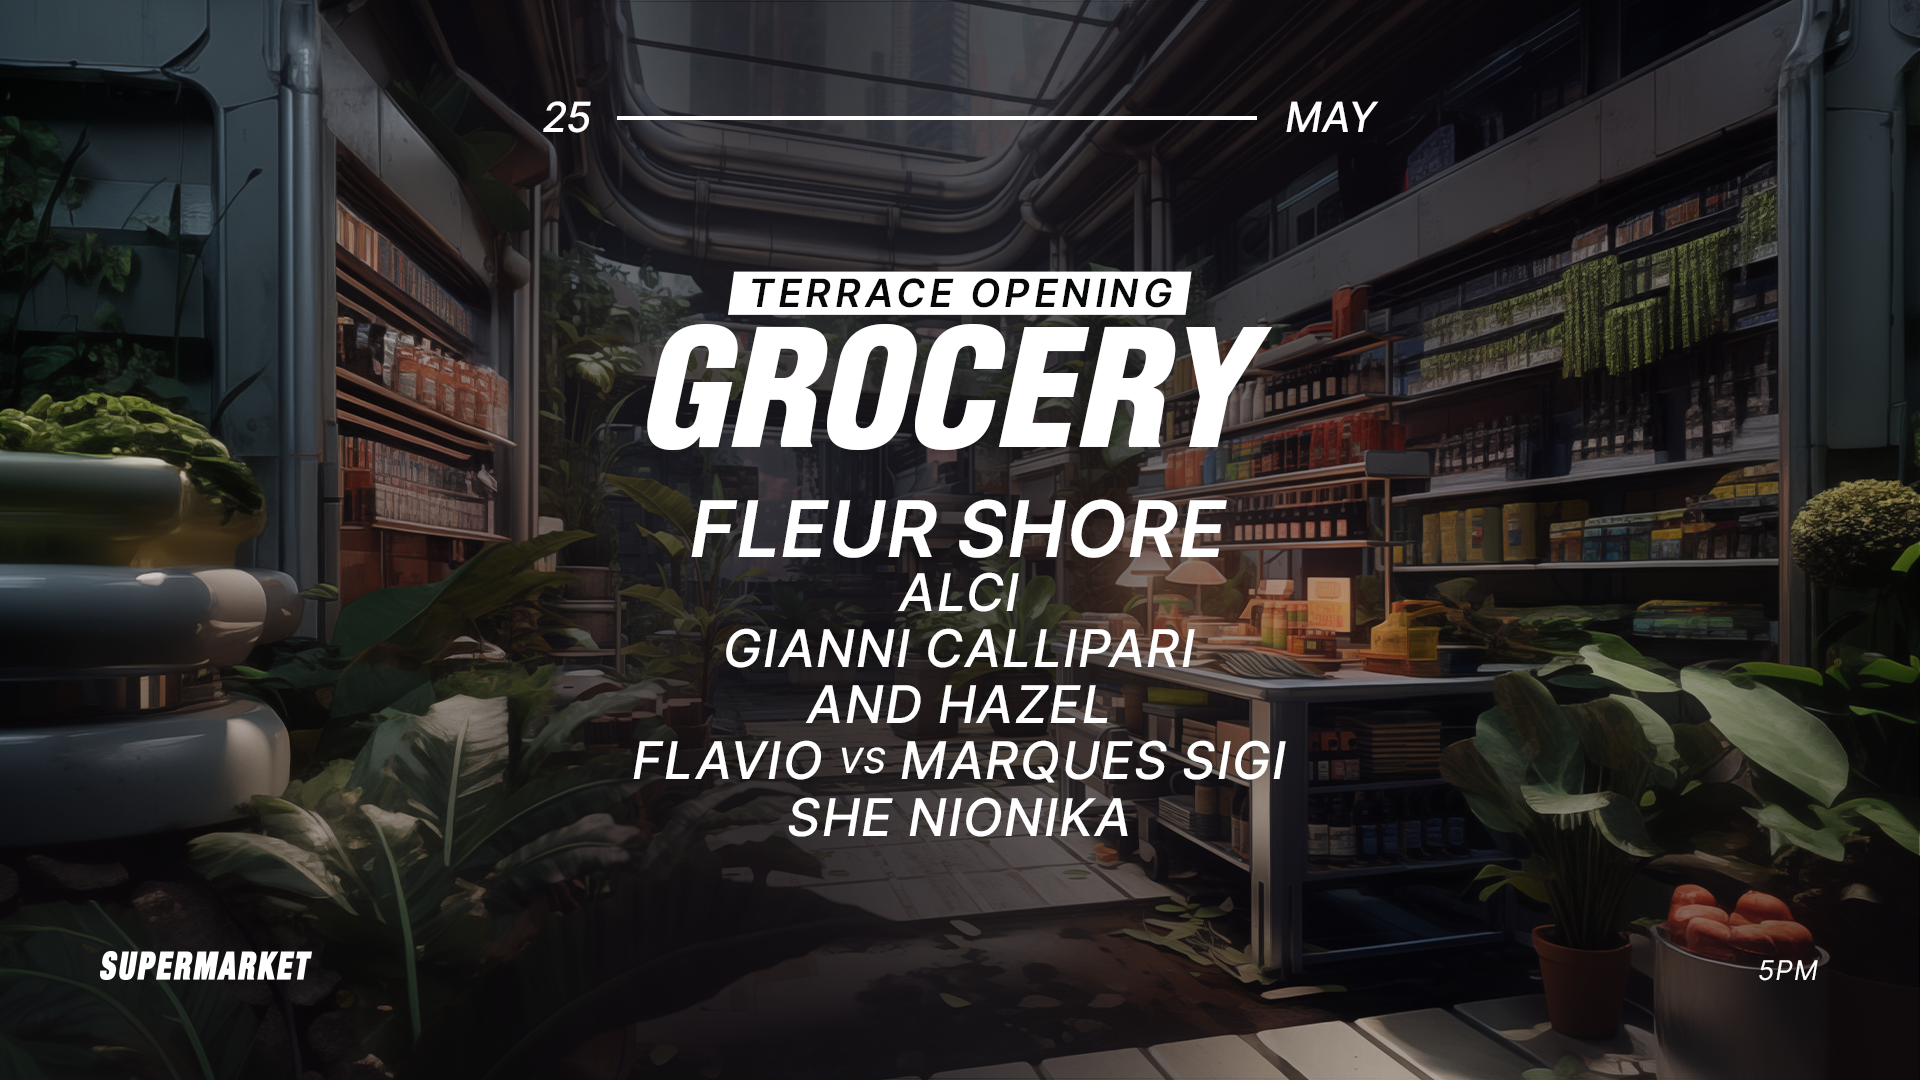 Grocery pres. Terrace opening with Fleur Shore - フライヤー表